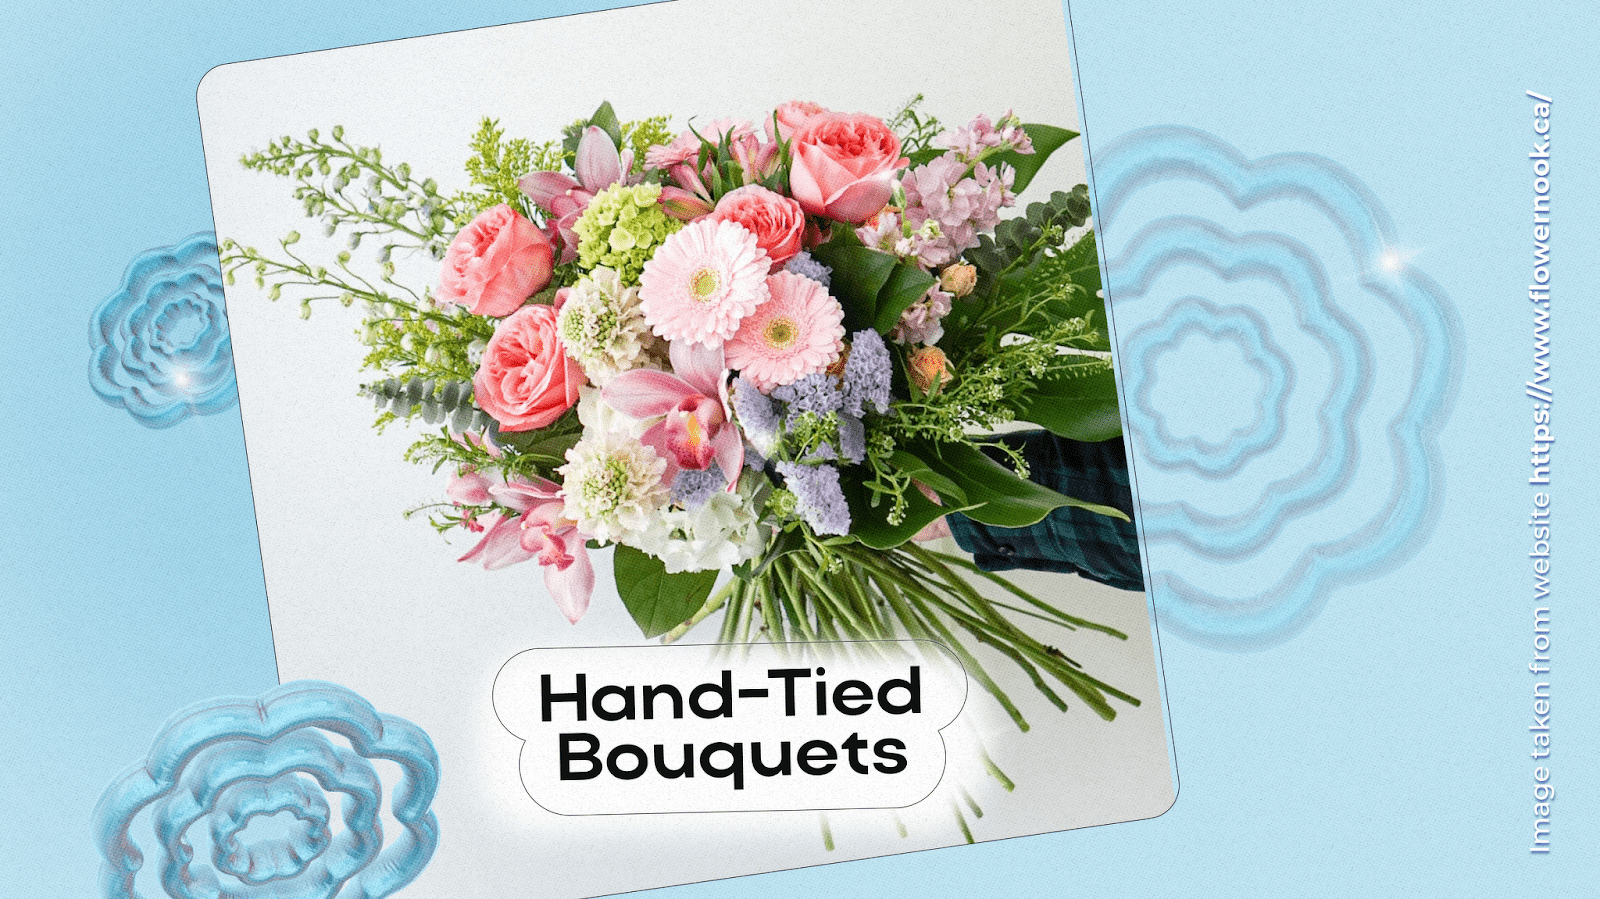 Hand-Tied Bouquets